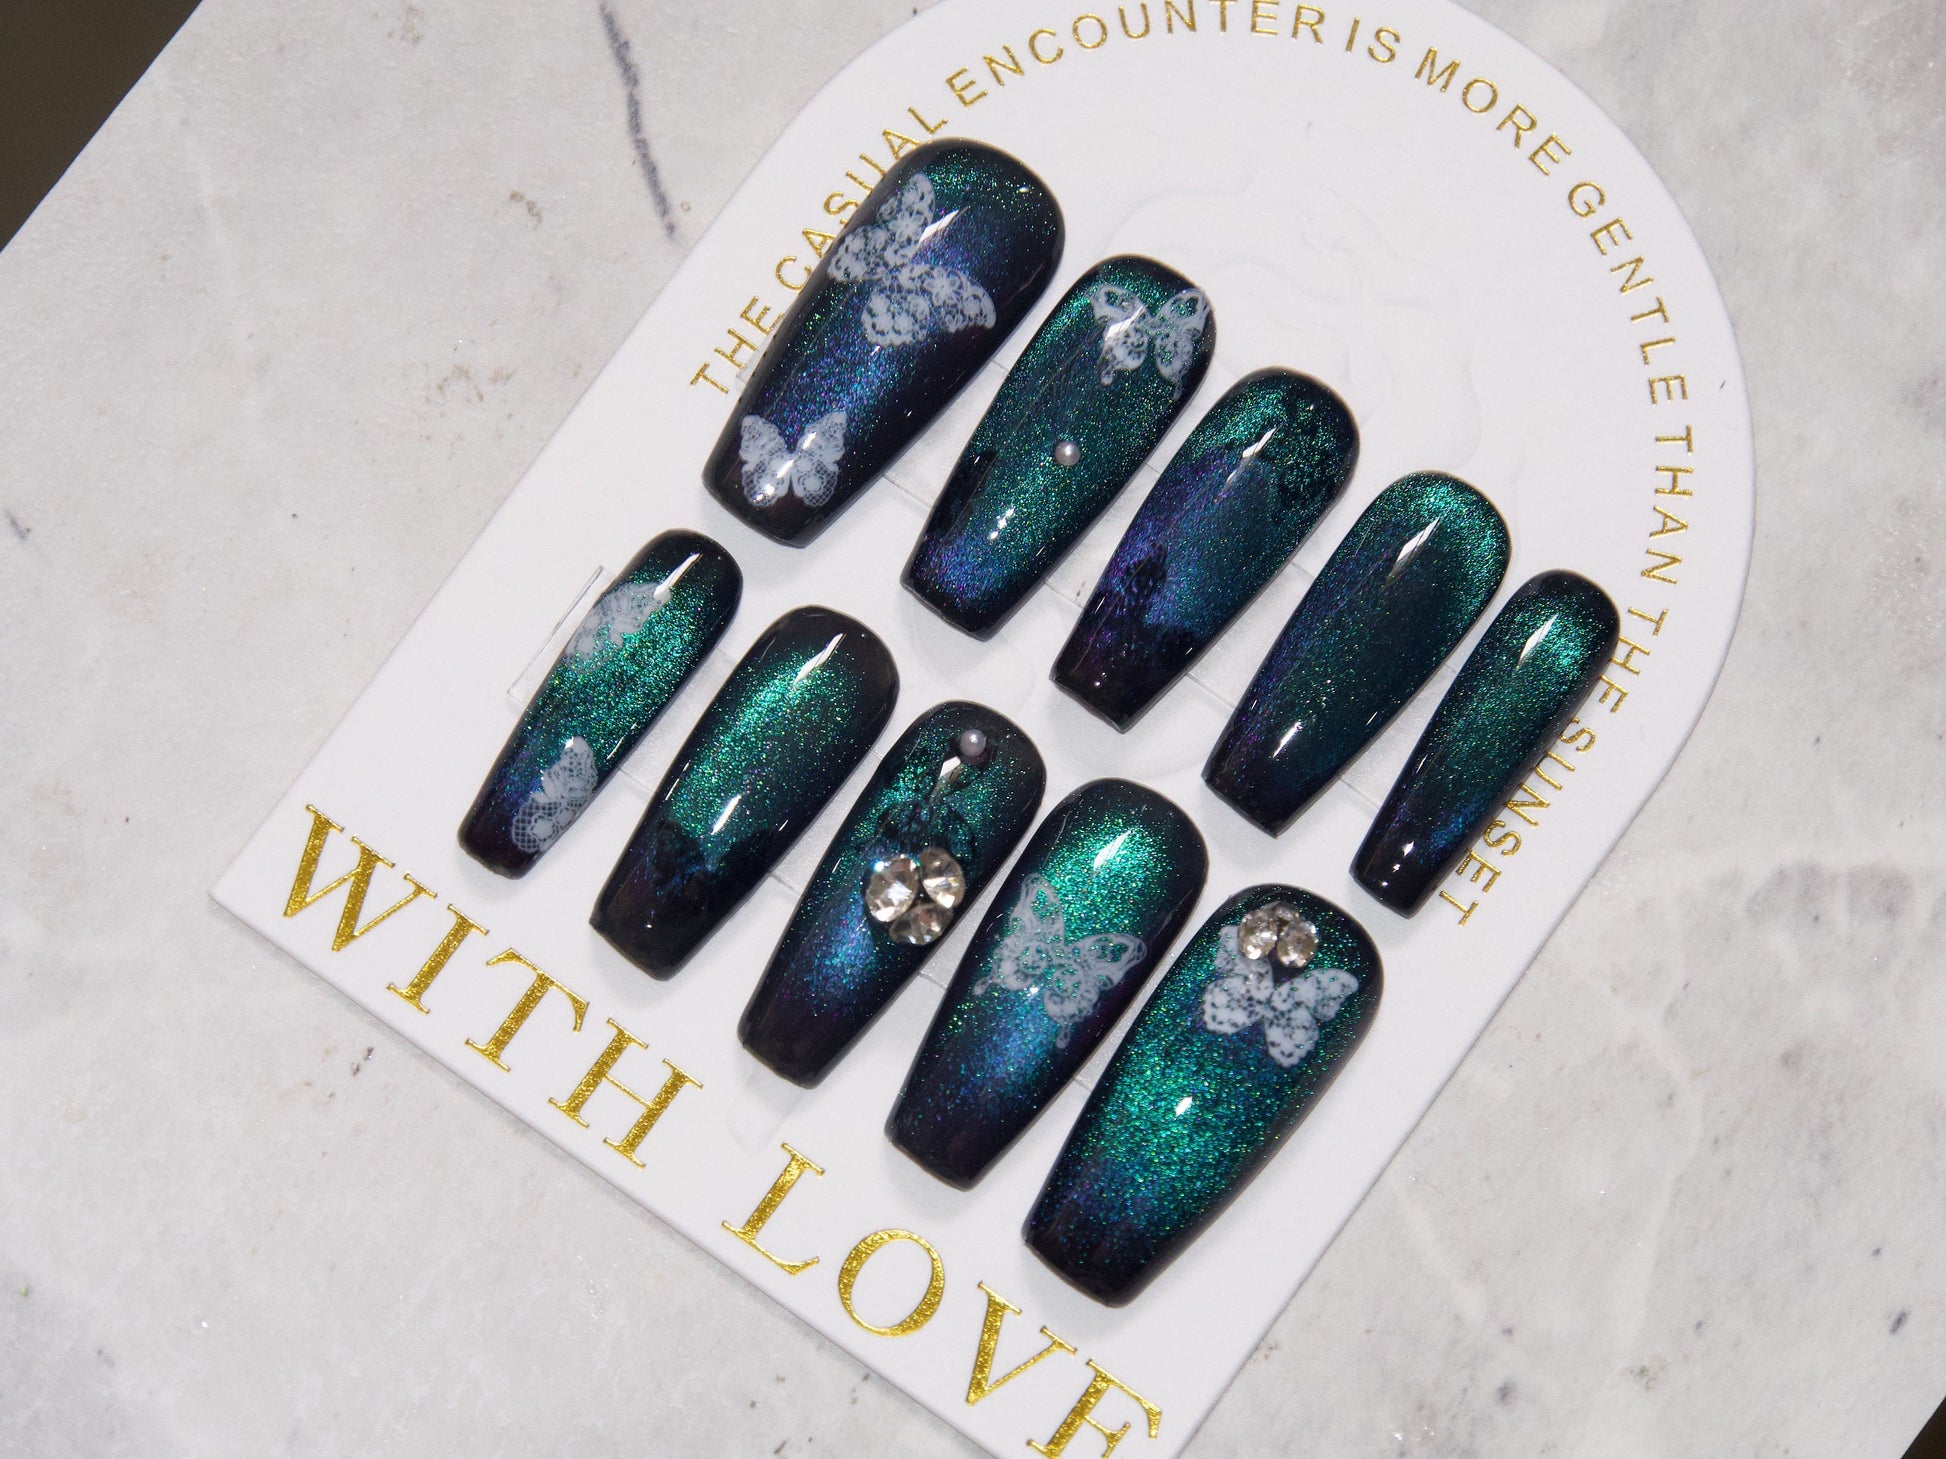 Lace Butterfly Delicate and Intricate Blue Green Purple Magnetic Cat eye Effect Customized Press on Nails